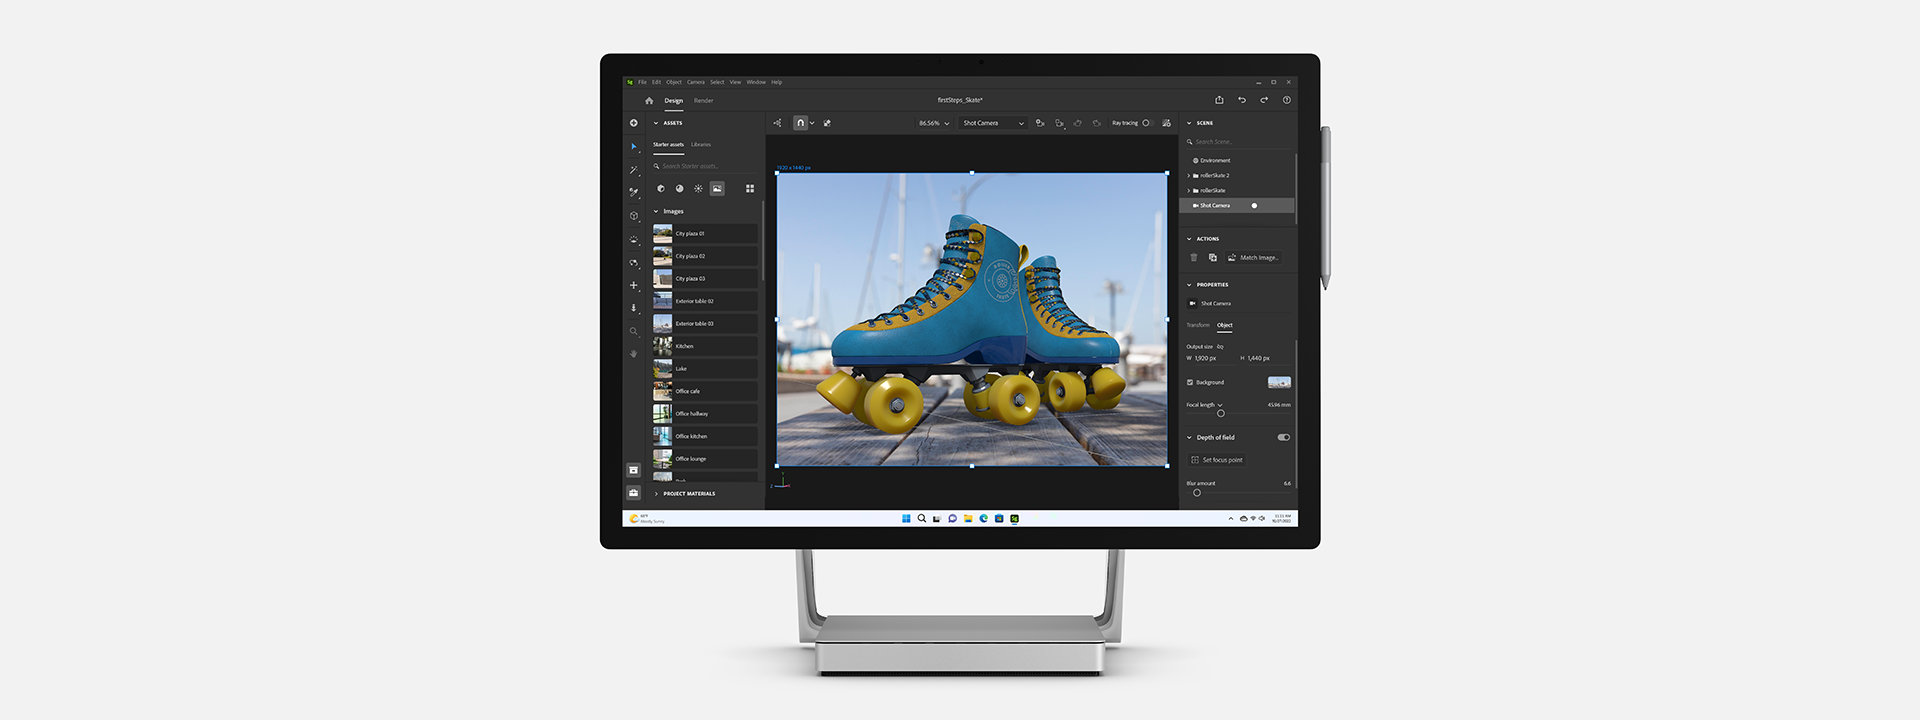 Surface Studio 2+ for Business with Adobe Substance 3D on the screen.